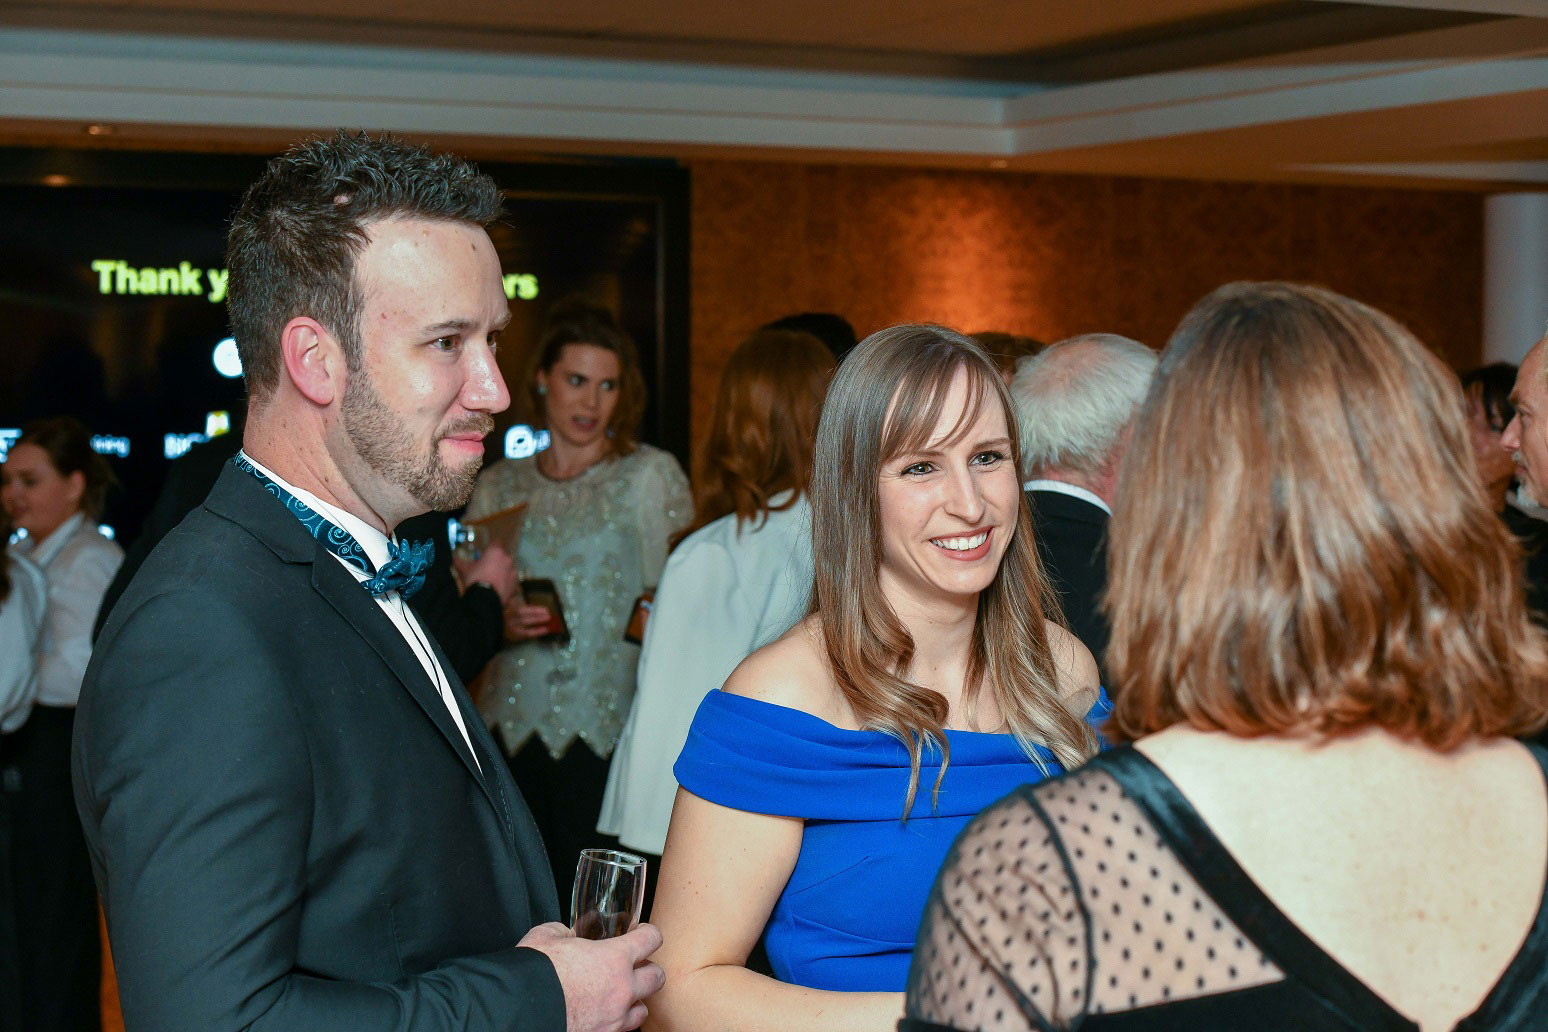 Guests at the Business Awards drinks reception